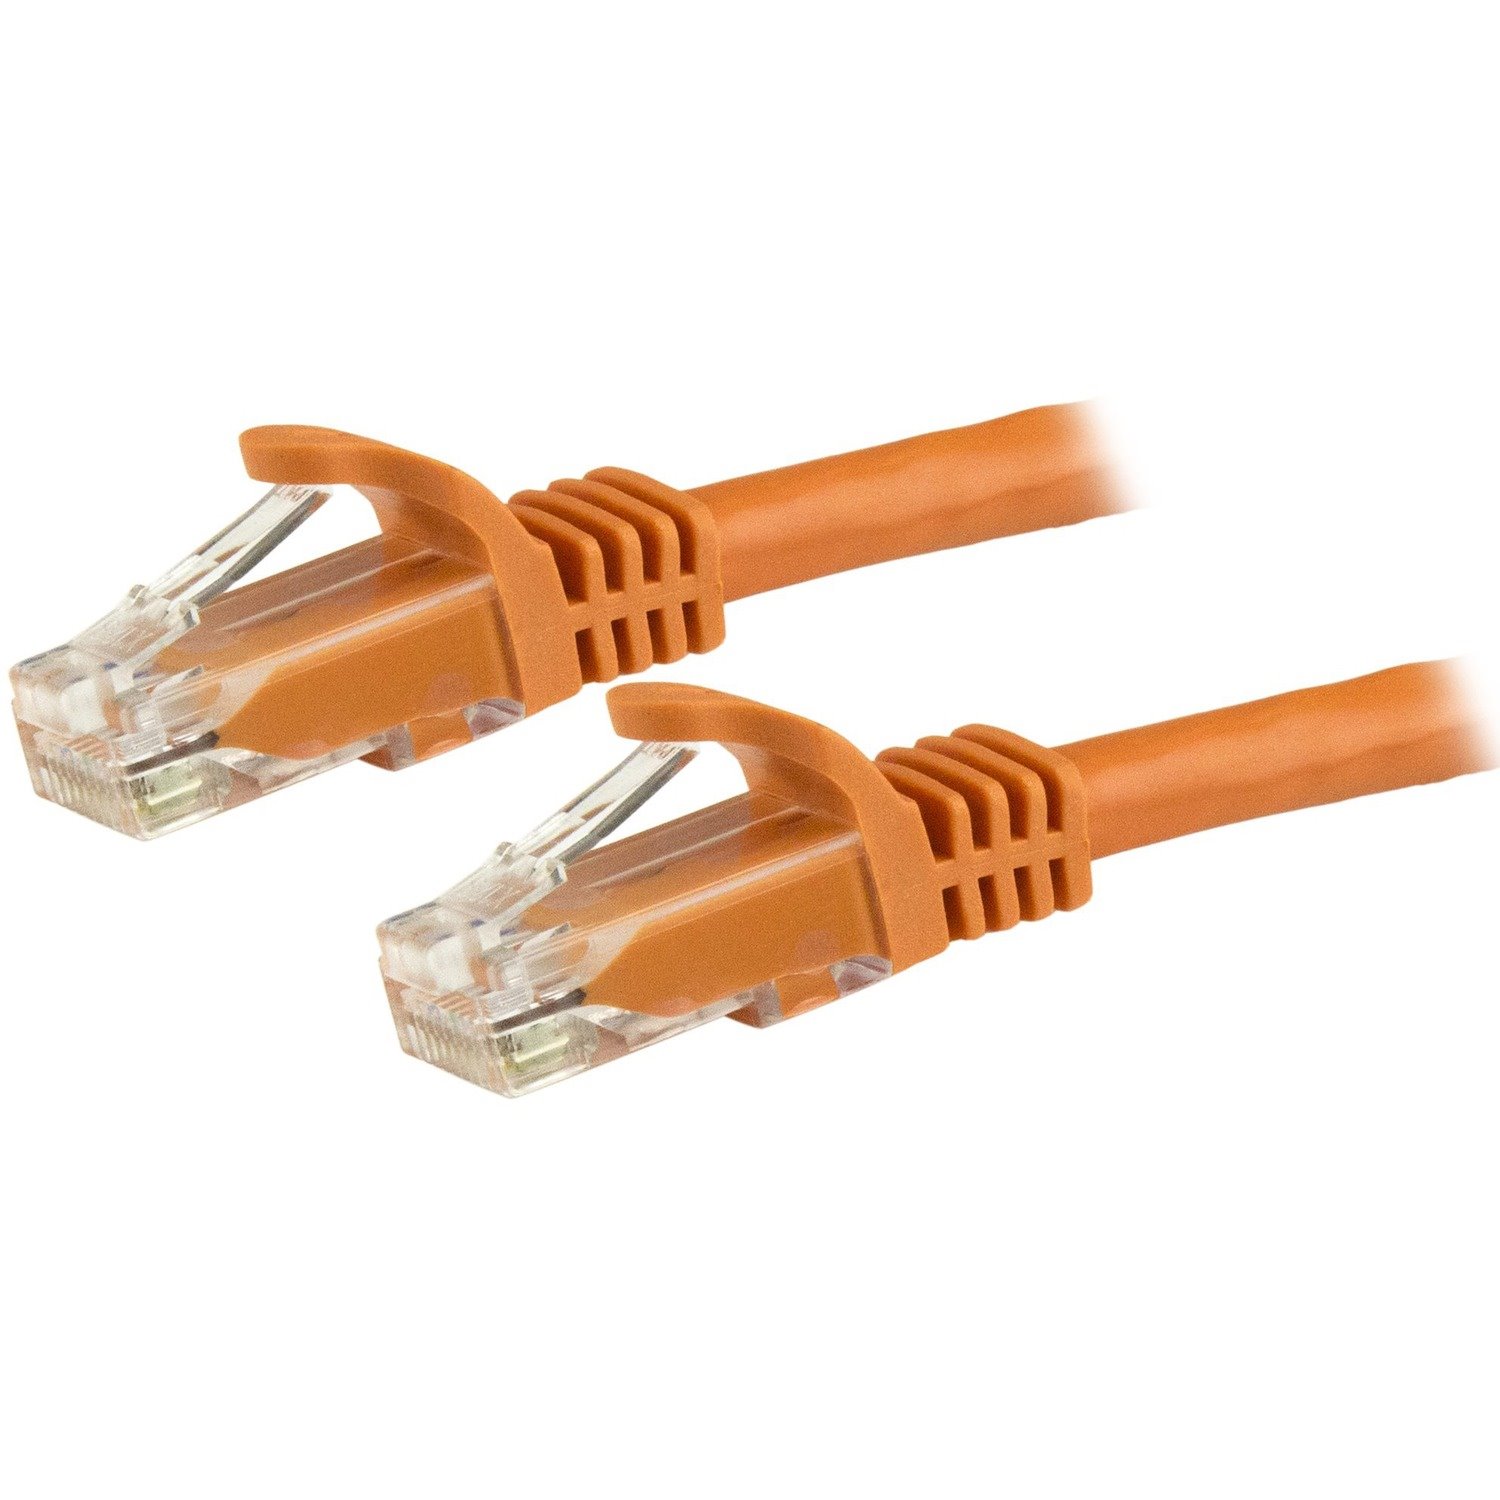 StarTech.com 1 m Category 6 Network Cable for Network Device - 1